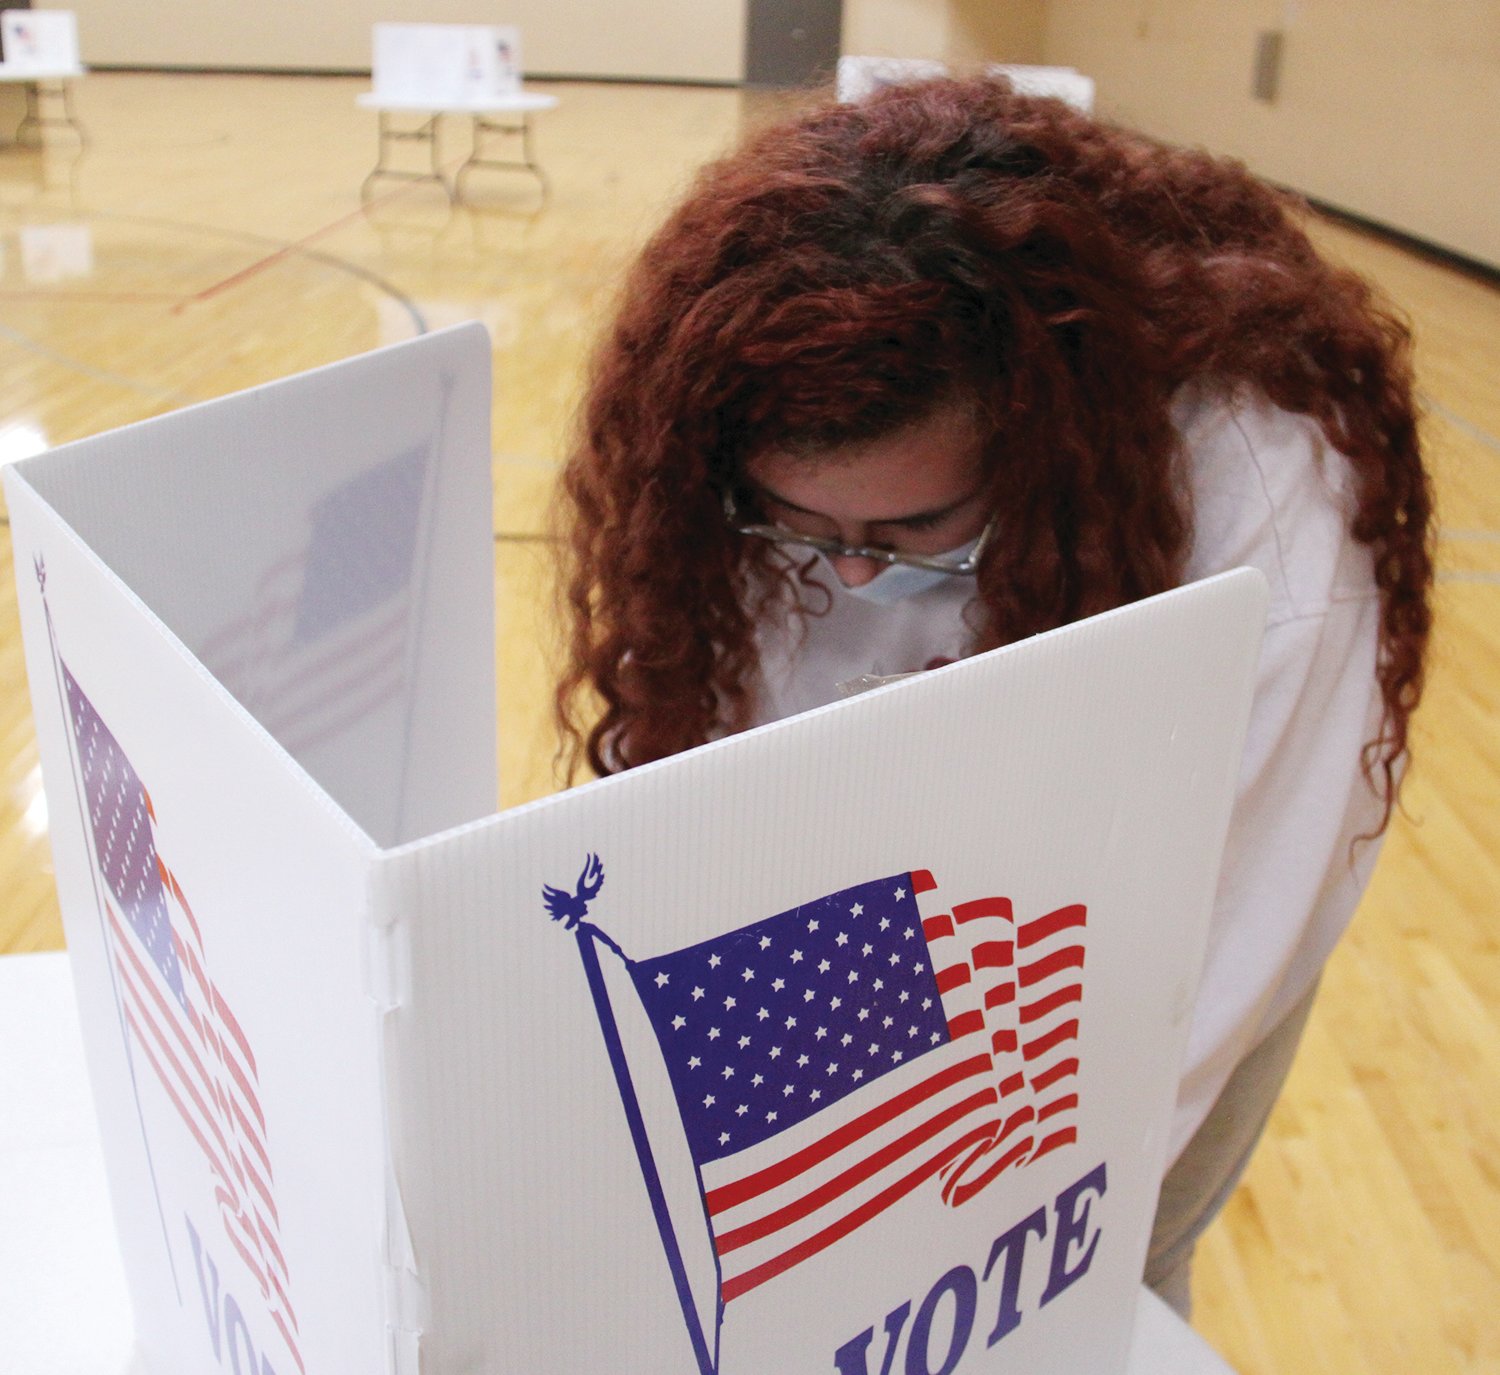 Mexico Middle School student Phyllis Timmons marks her ballot during the mock election organized by the League of Women Voters on Thursday. (Dave Faries)